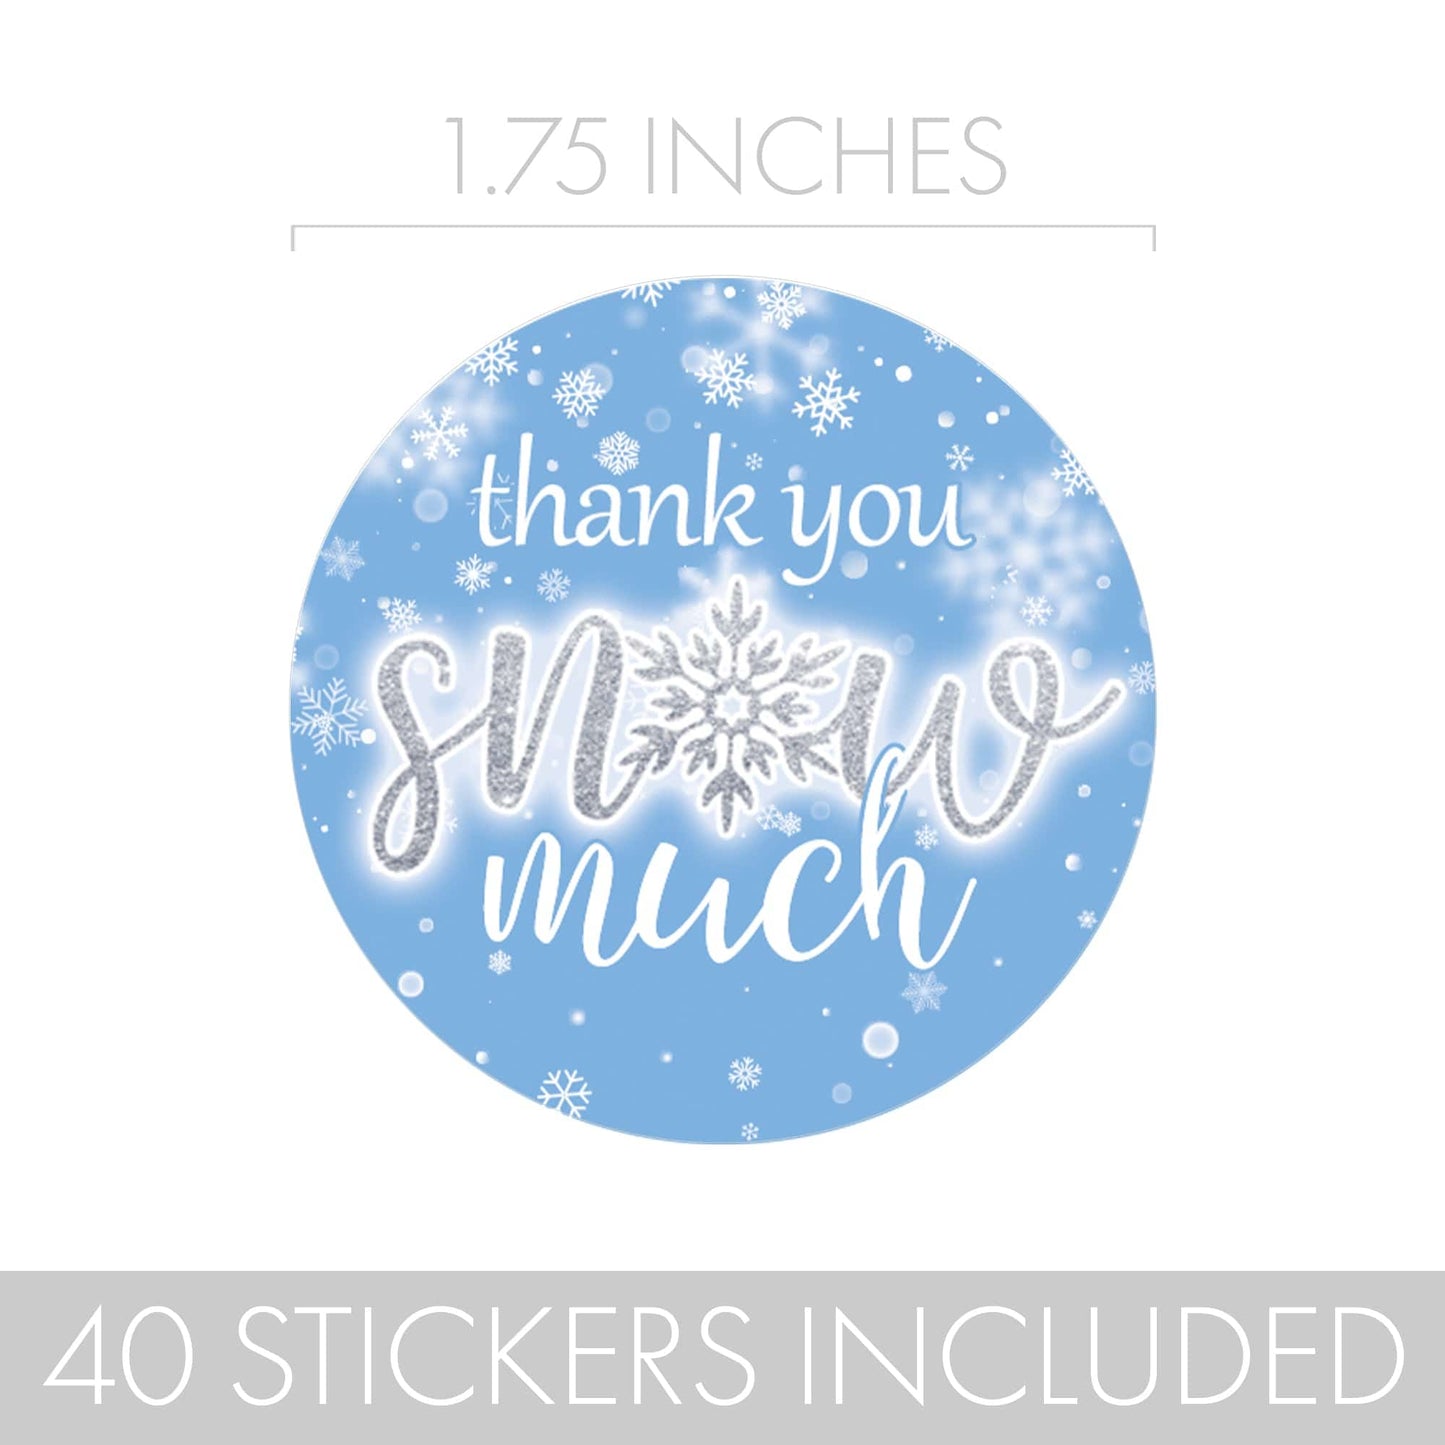 Celebrate your little one's Onederland with these festive snowflake labels